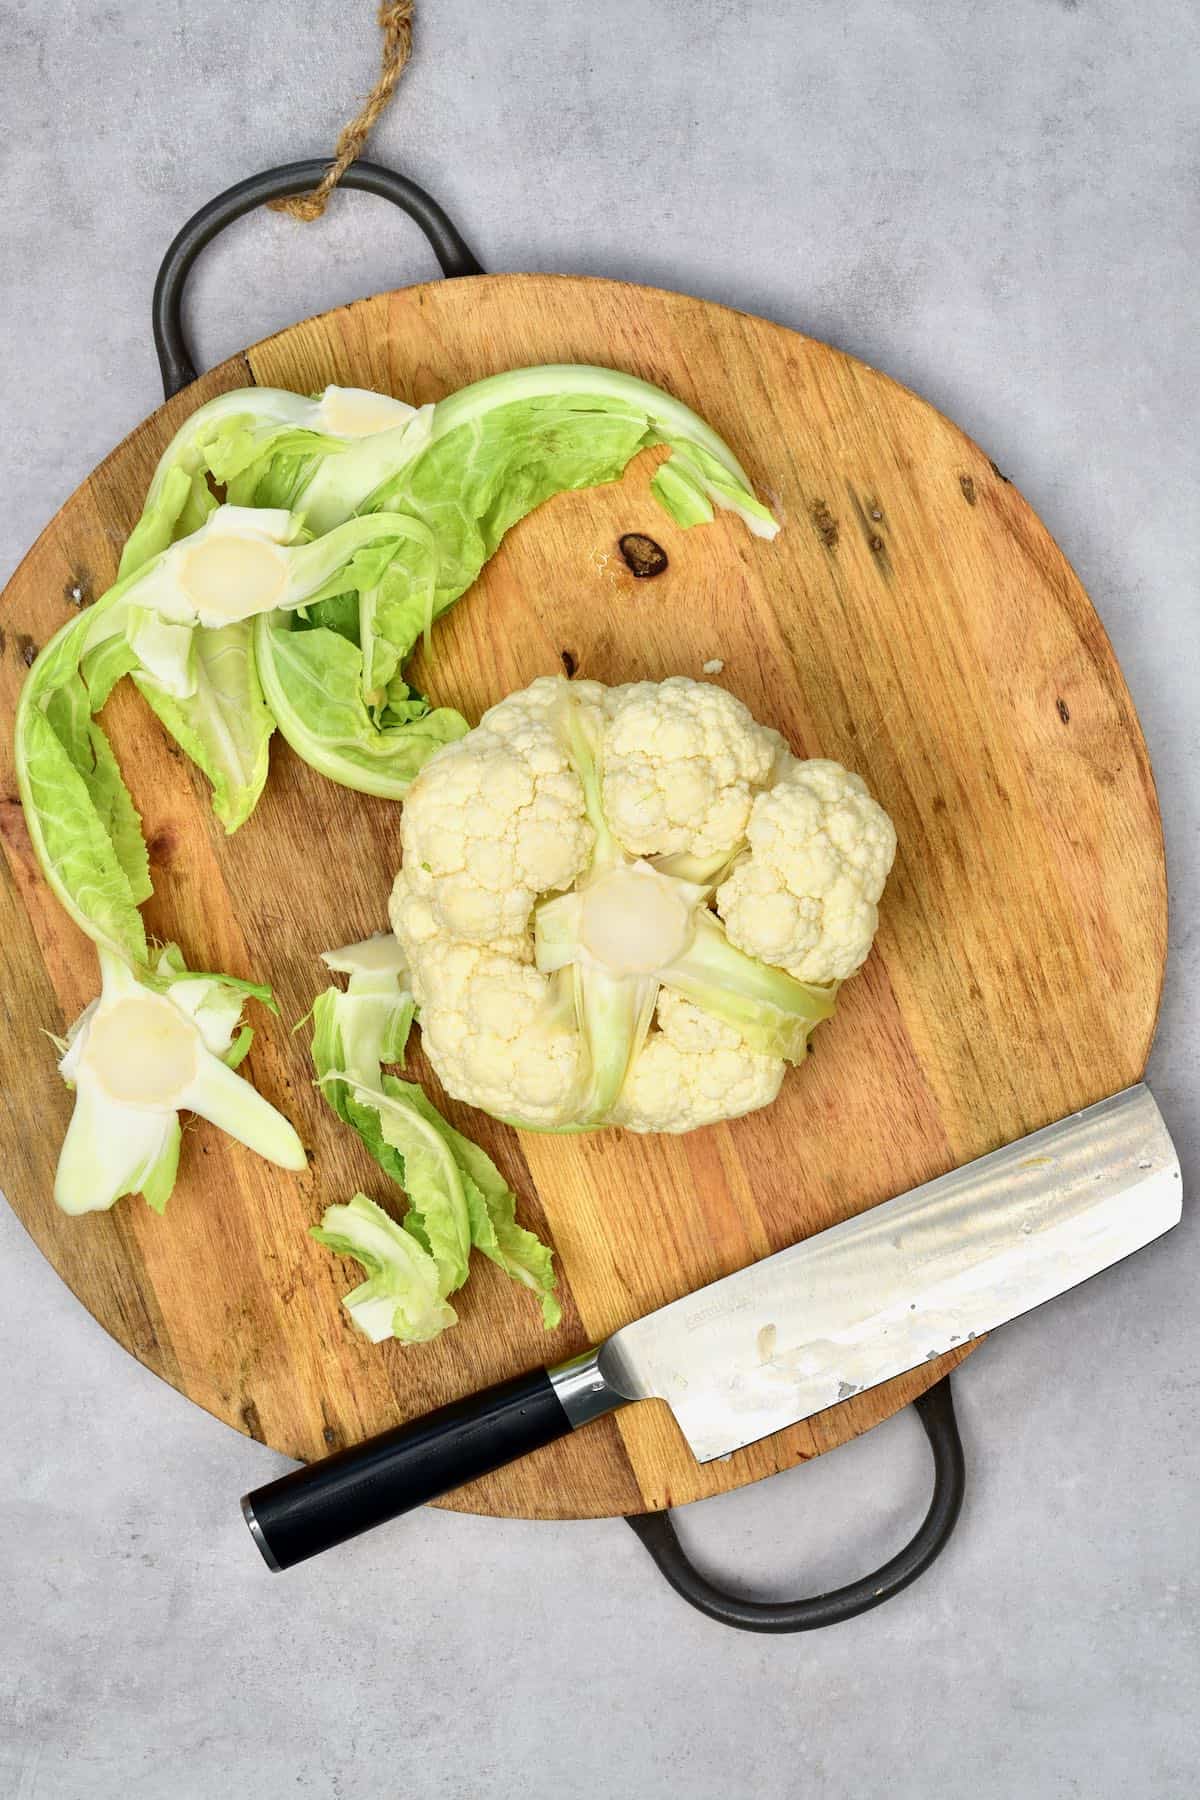 Removing leaves from a cauliflower head